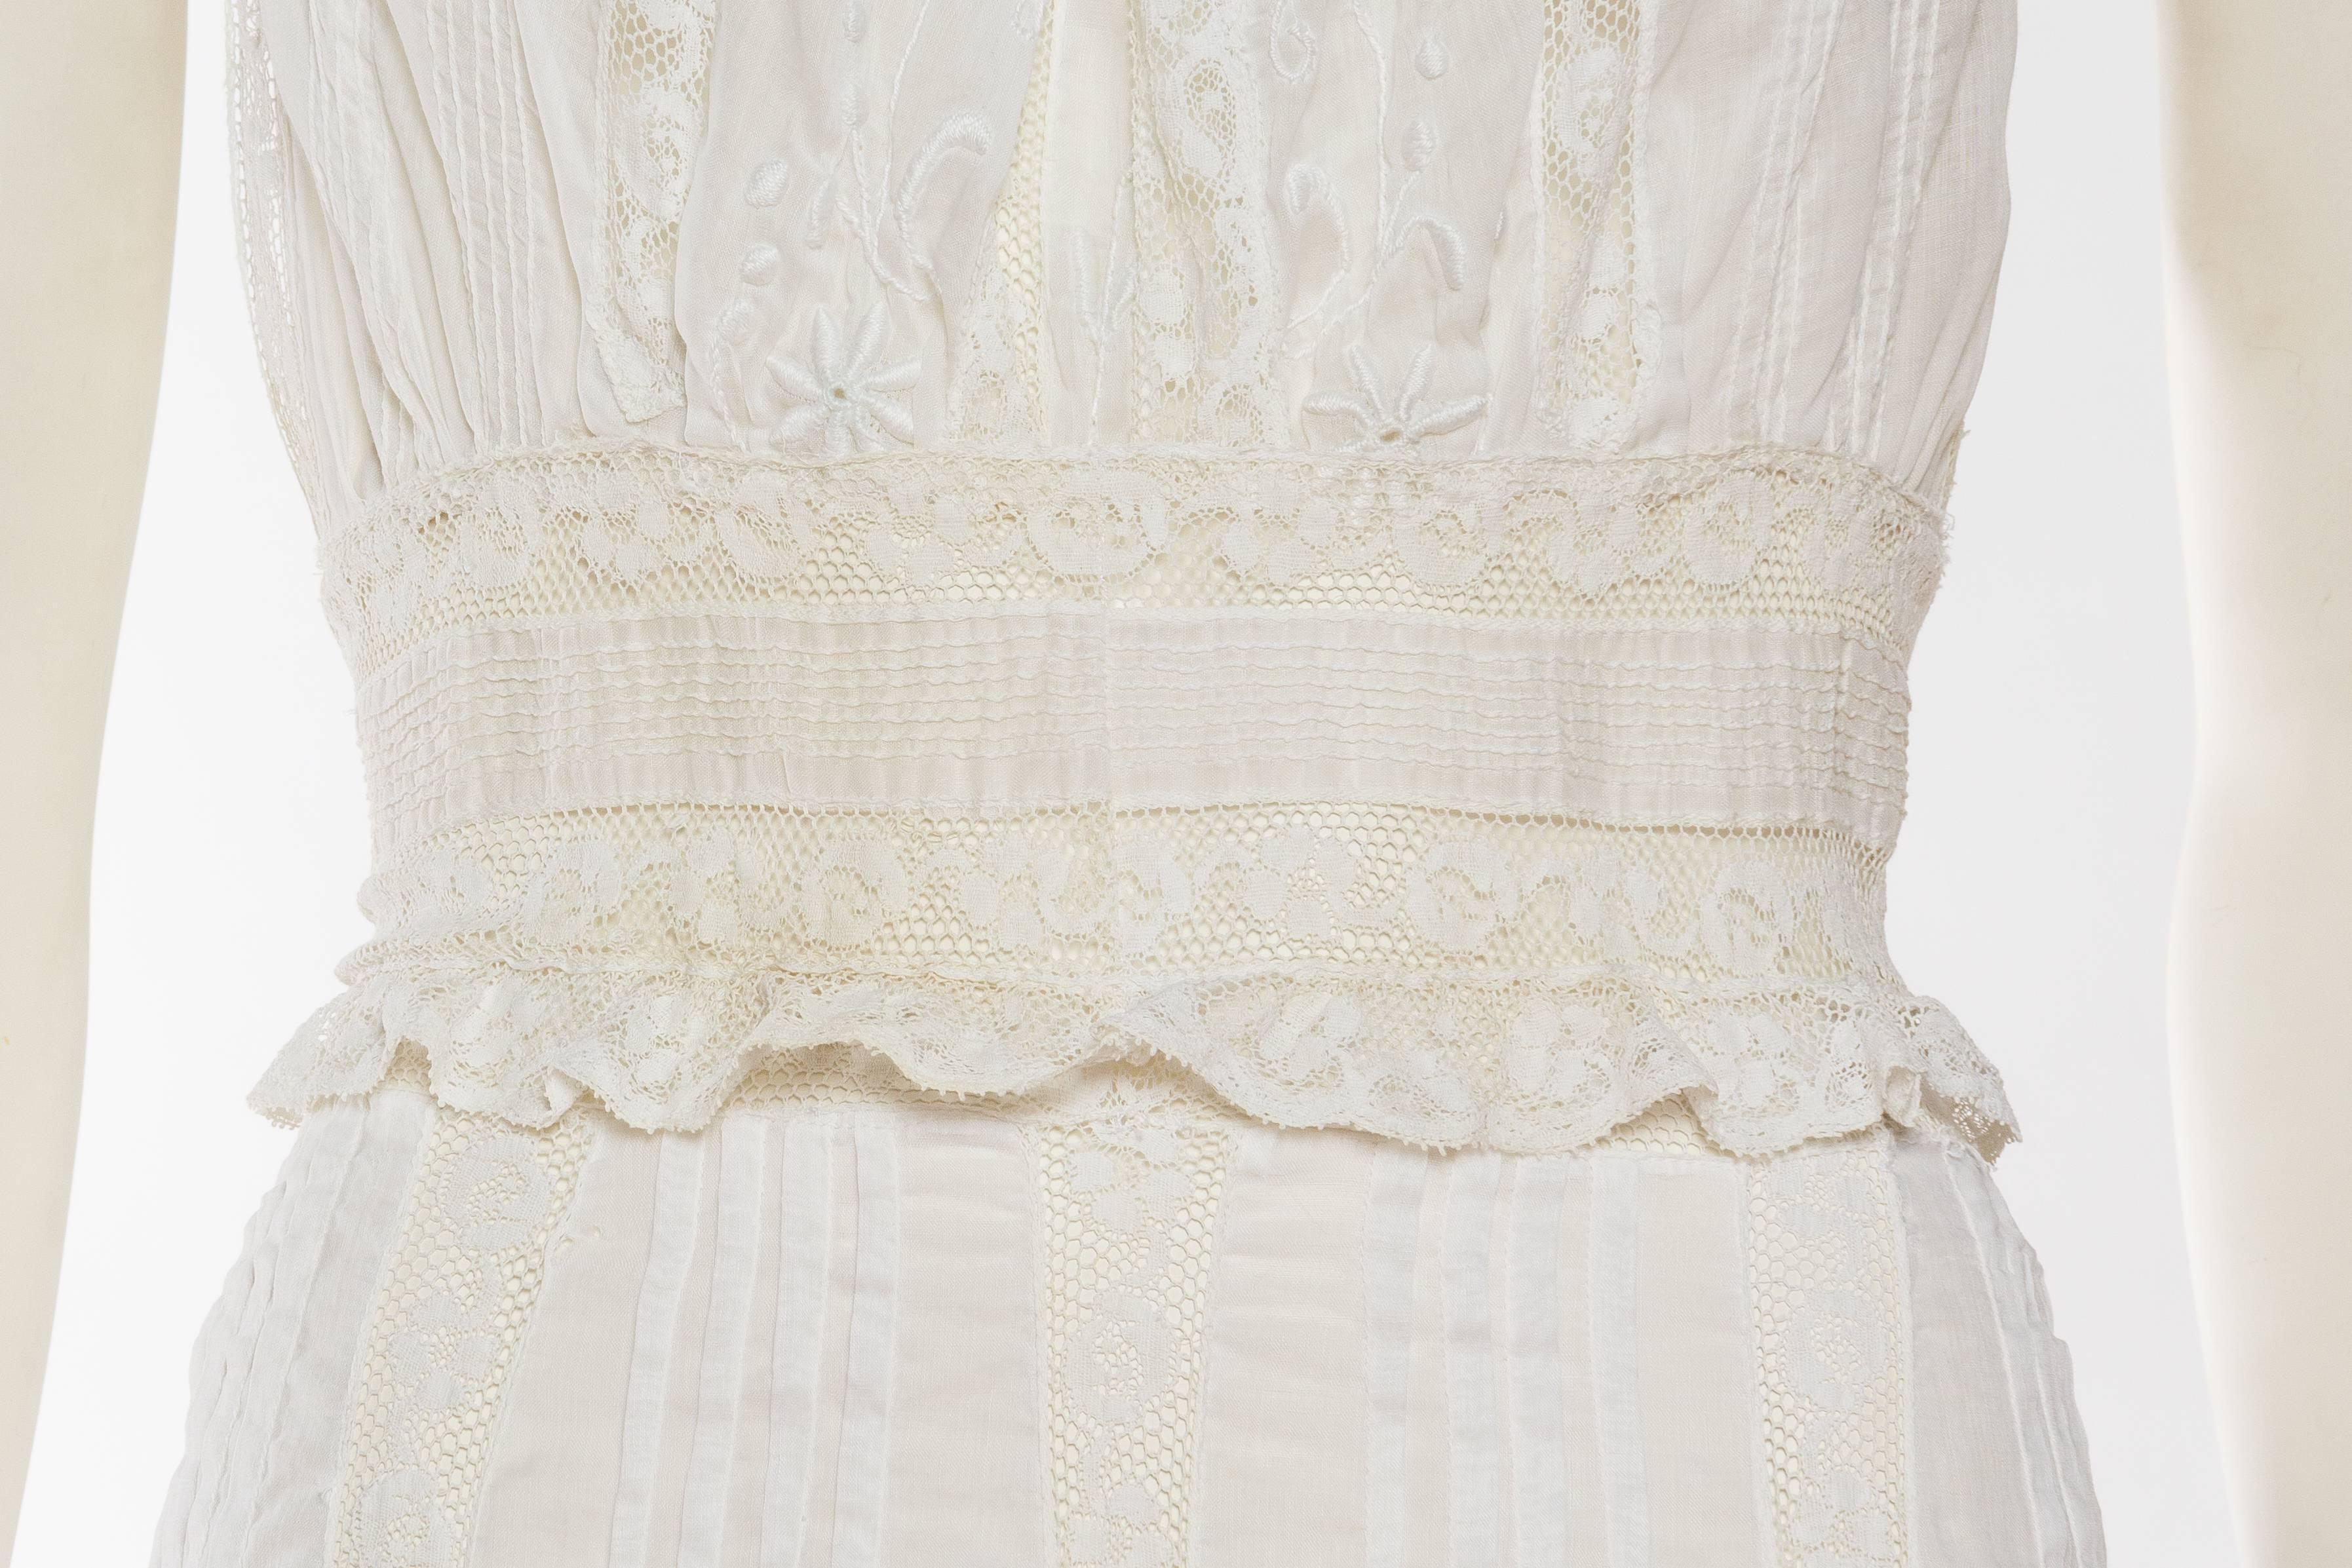 1905 Cotton and Lace Dress 1